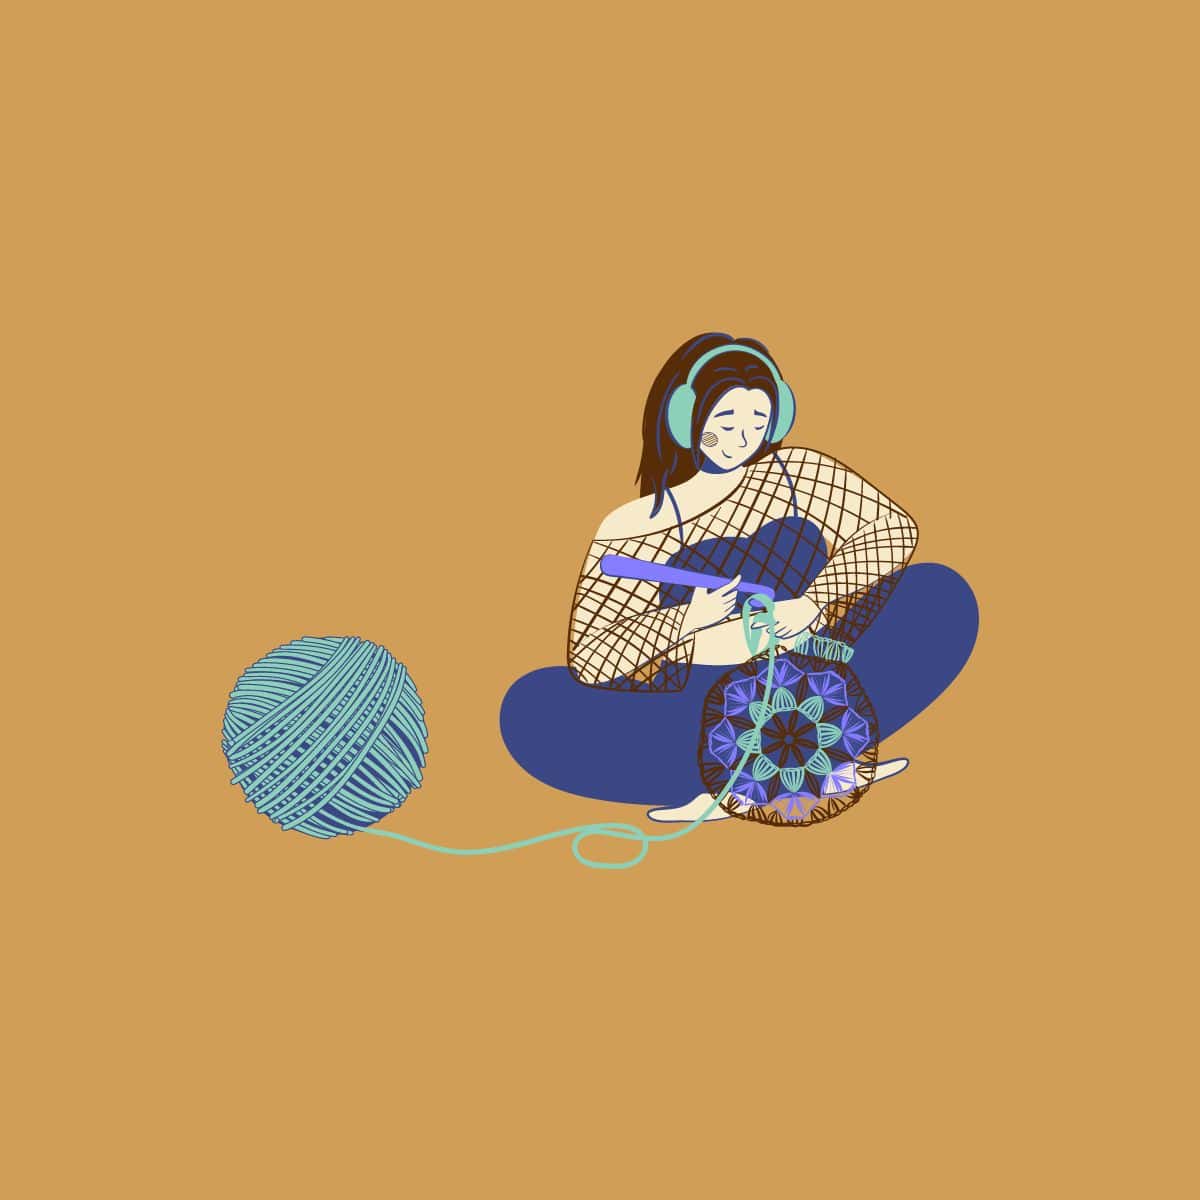 An illustration of a woman creating a crochet garment with a ball of yarn.